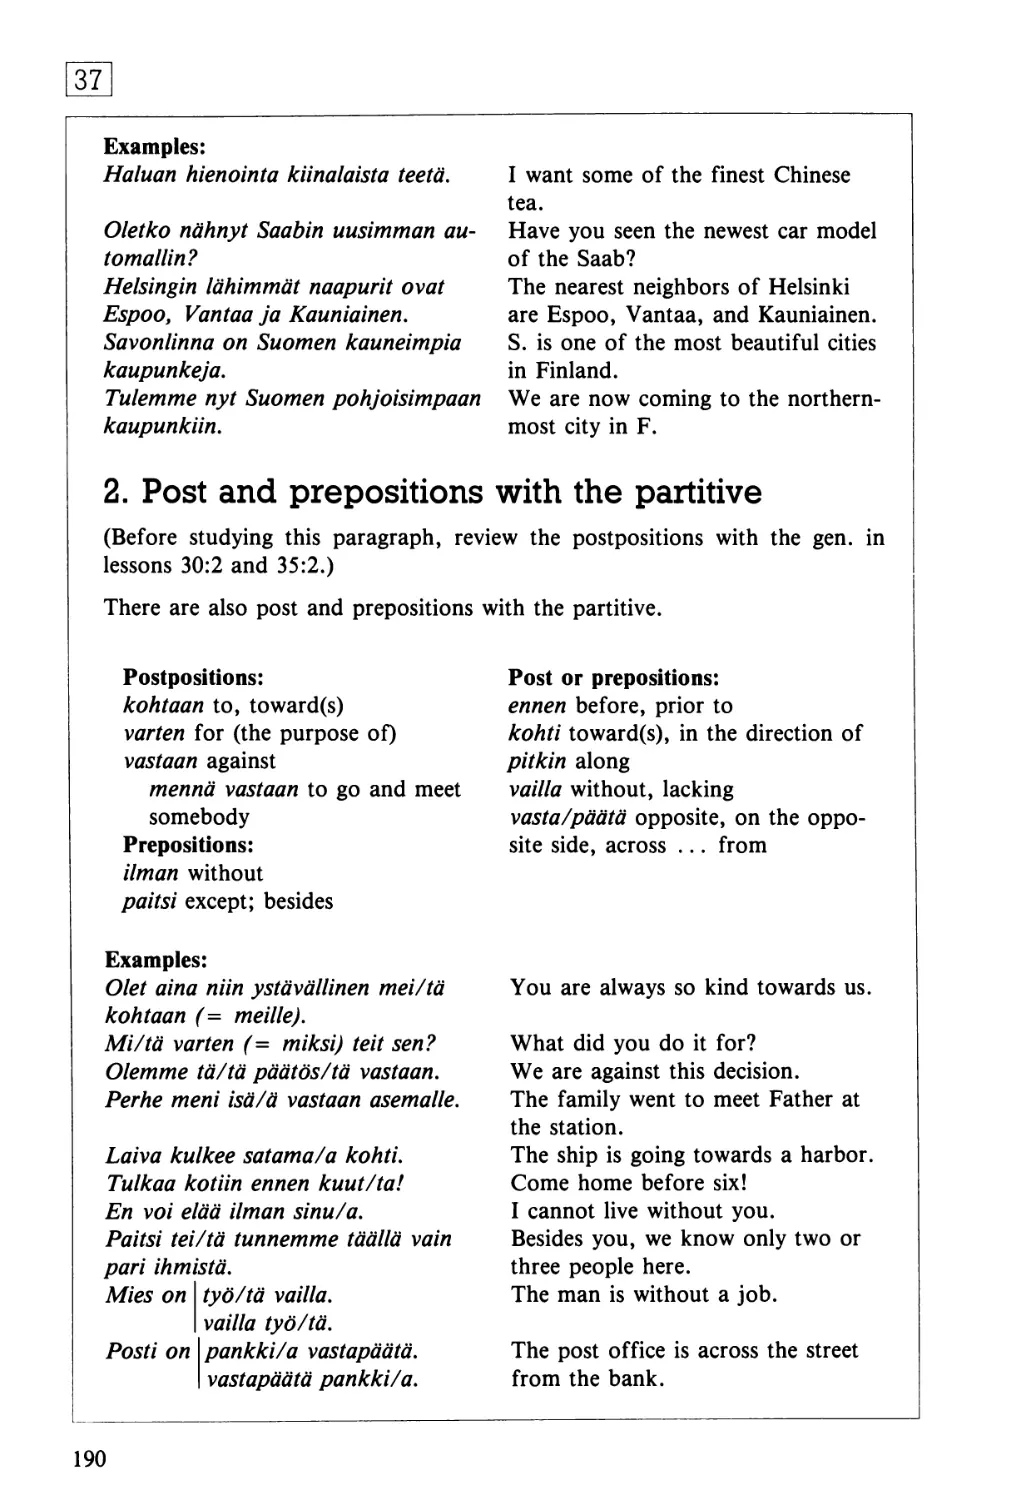 Post and prepositions with the partitive